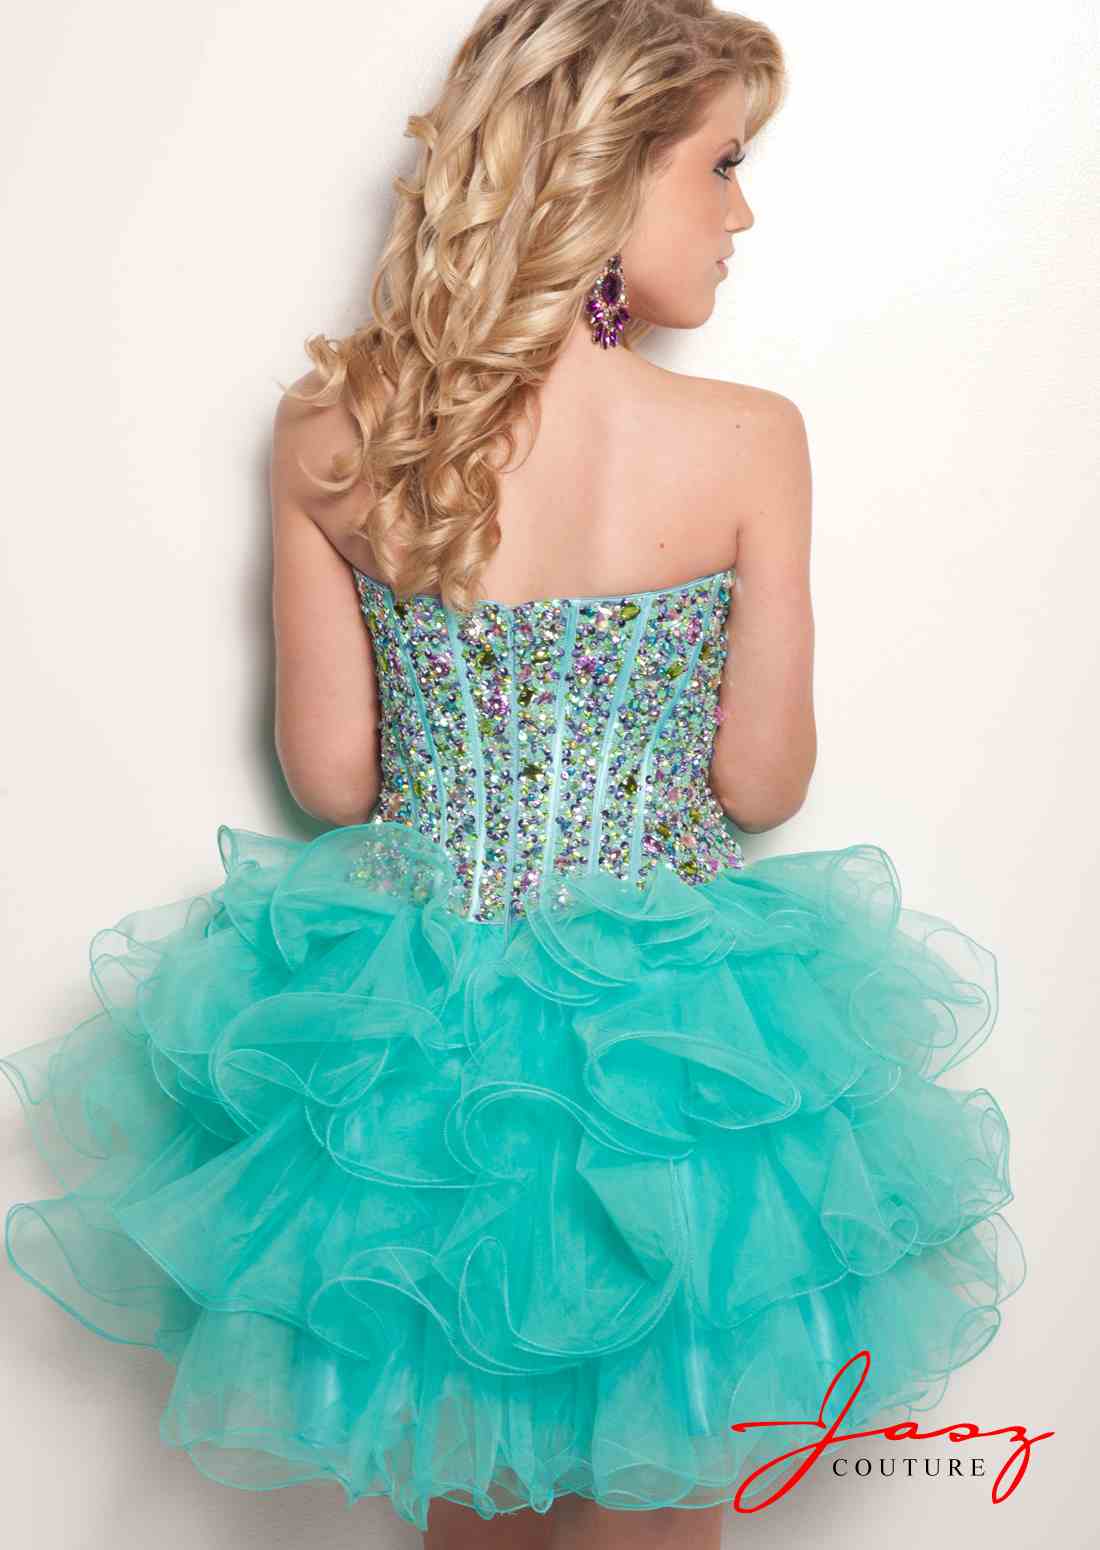 couture 4702 prom dress id 4702 2012 jasz couture homecoming dresses ...